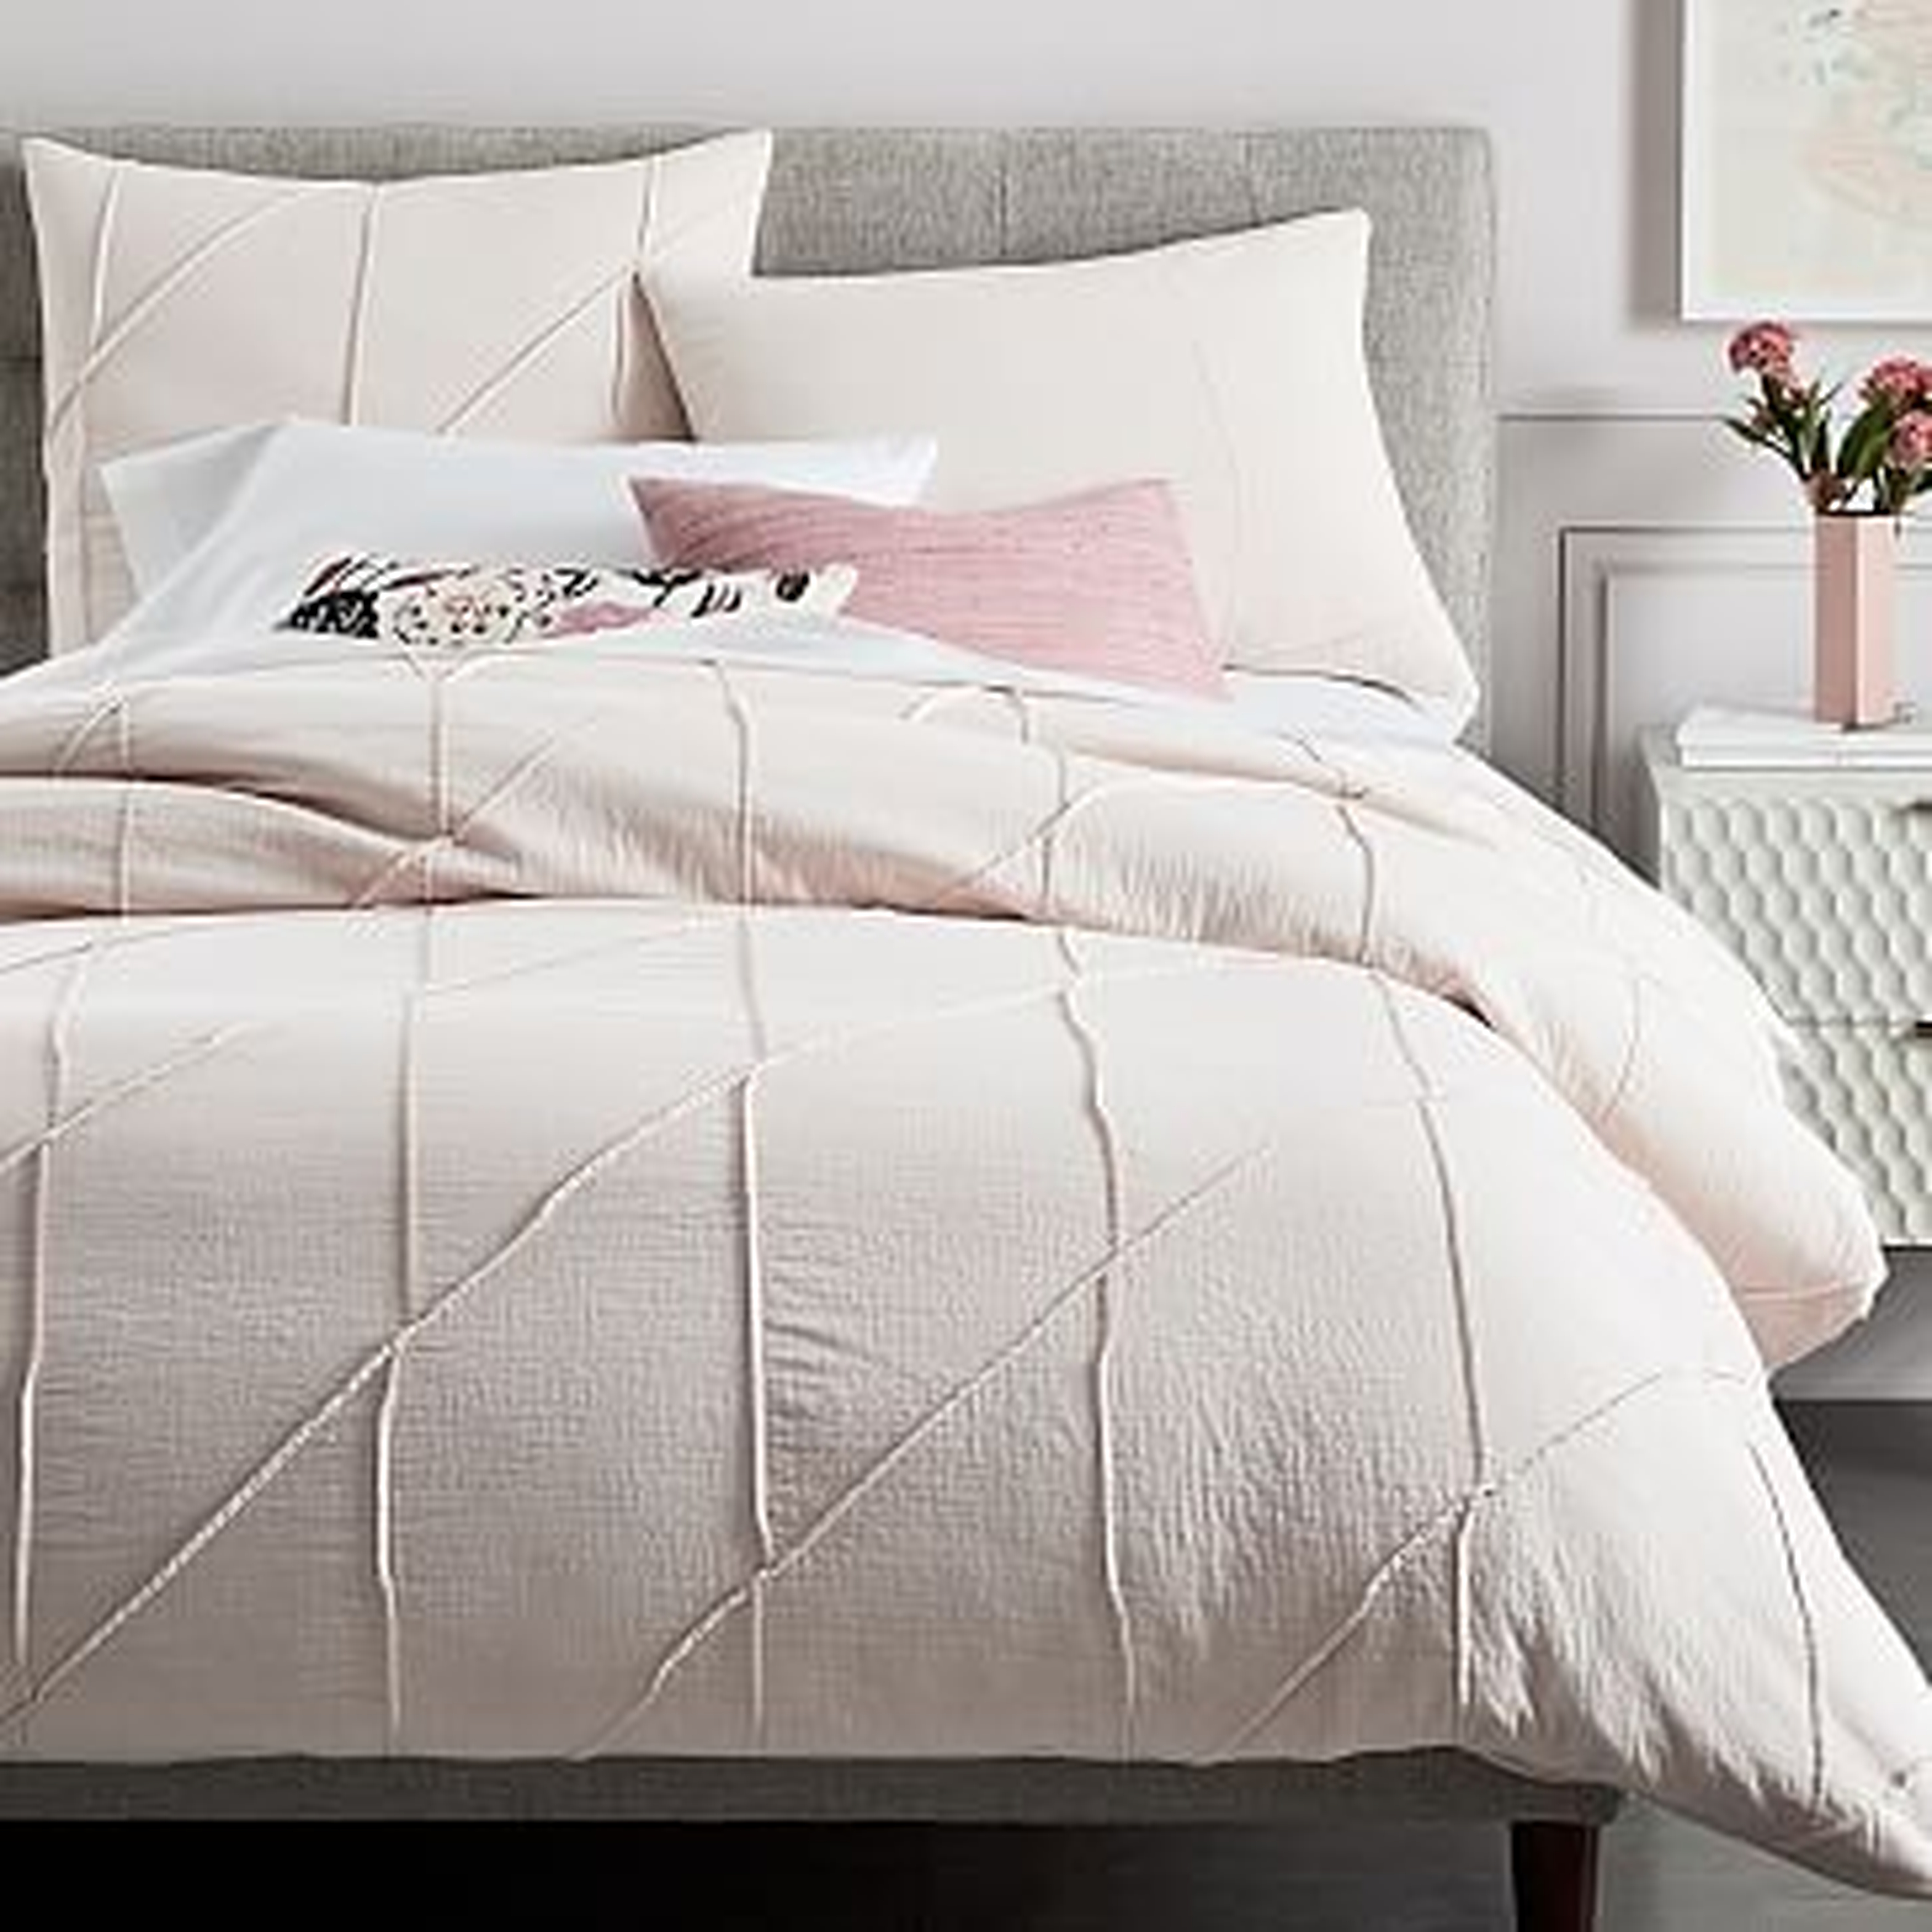 Organic Pleated Grid Duvet Cover, QUEEN, Pink Blush - West Elm